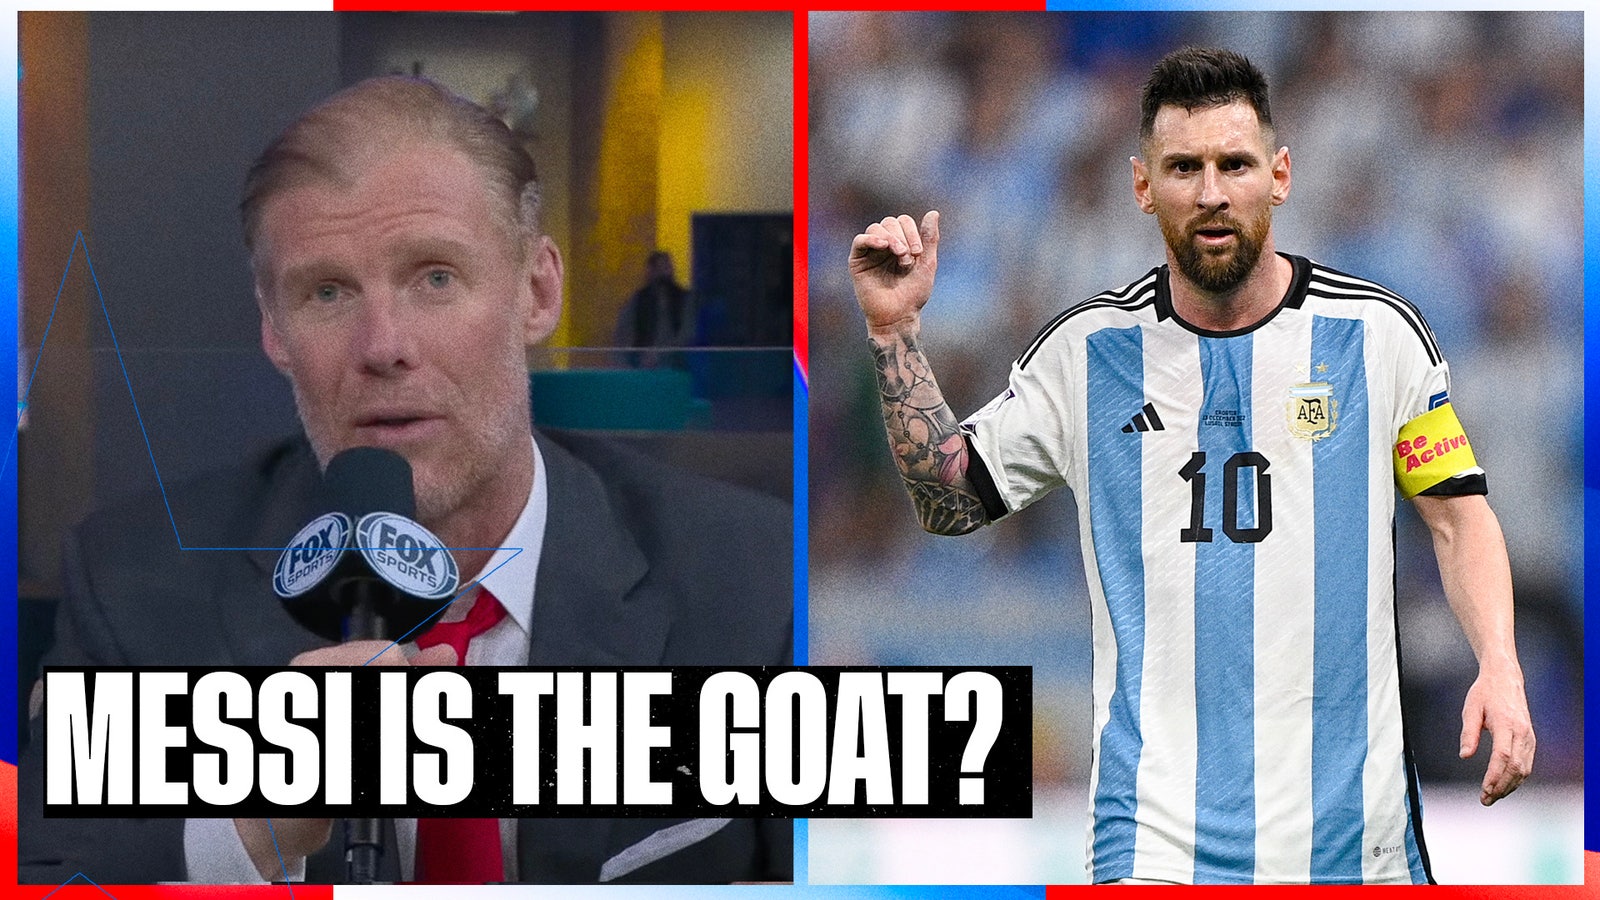 Did Lionel Messi prove he's the GOAT?